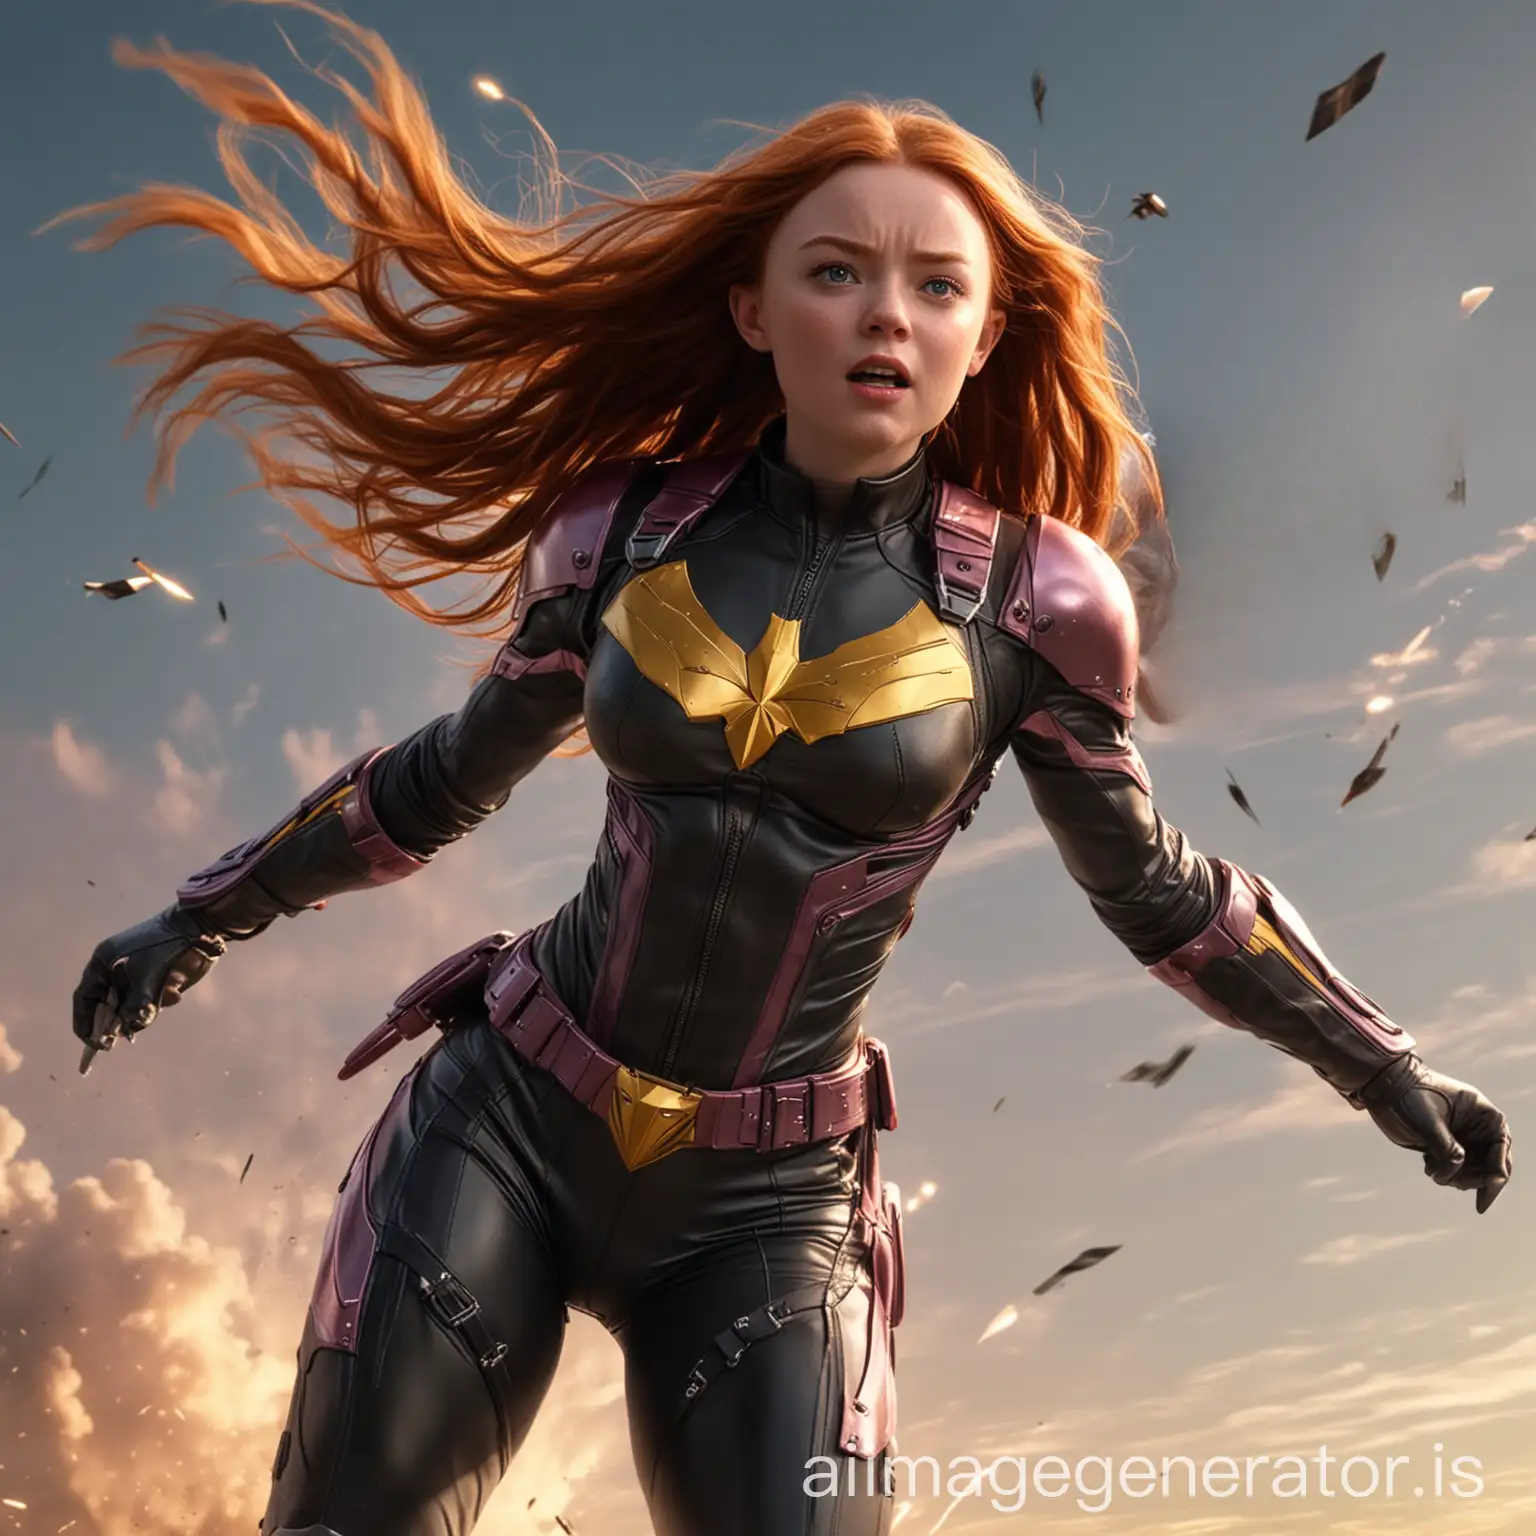 sadie sink as songbird from the thunderbolts in sexy but realistic costume, full body, flying through sky, firing energy bolt by screaming